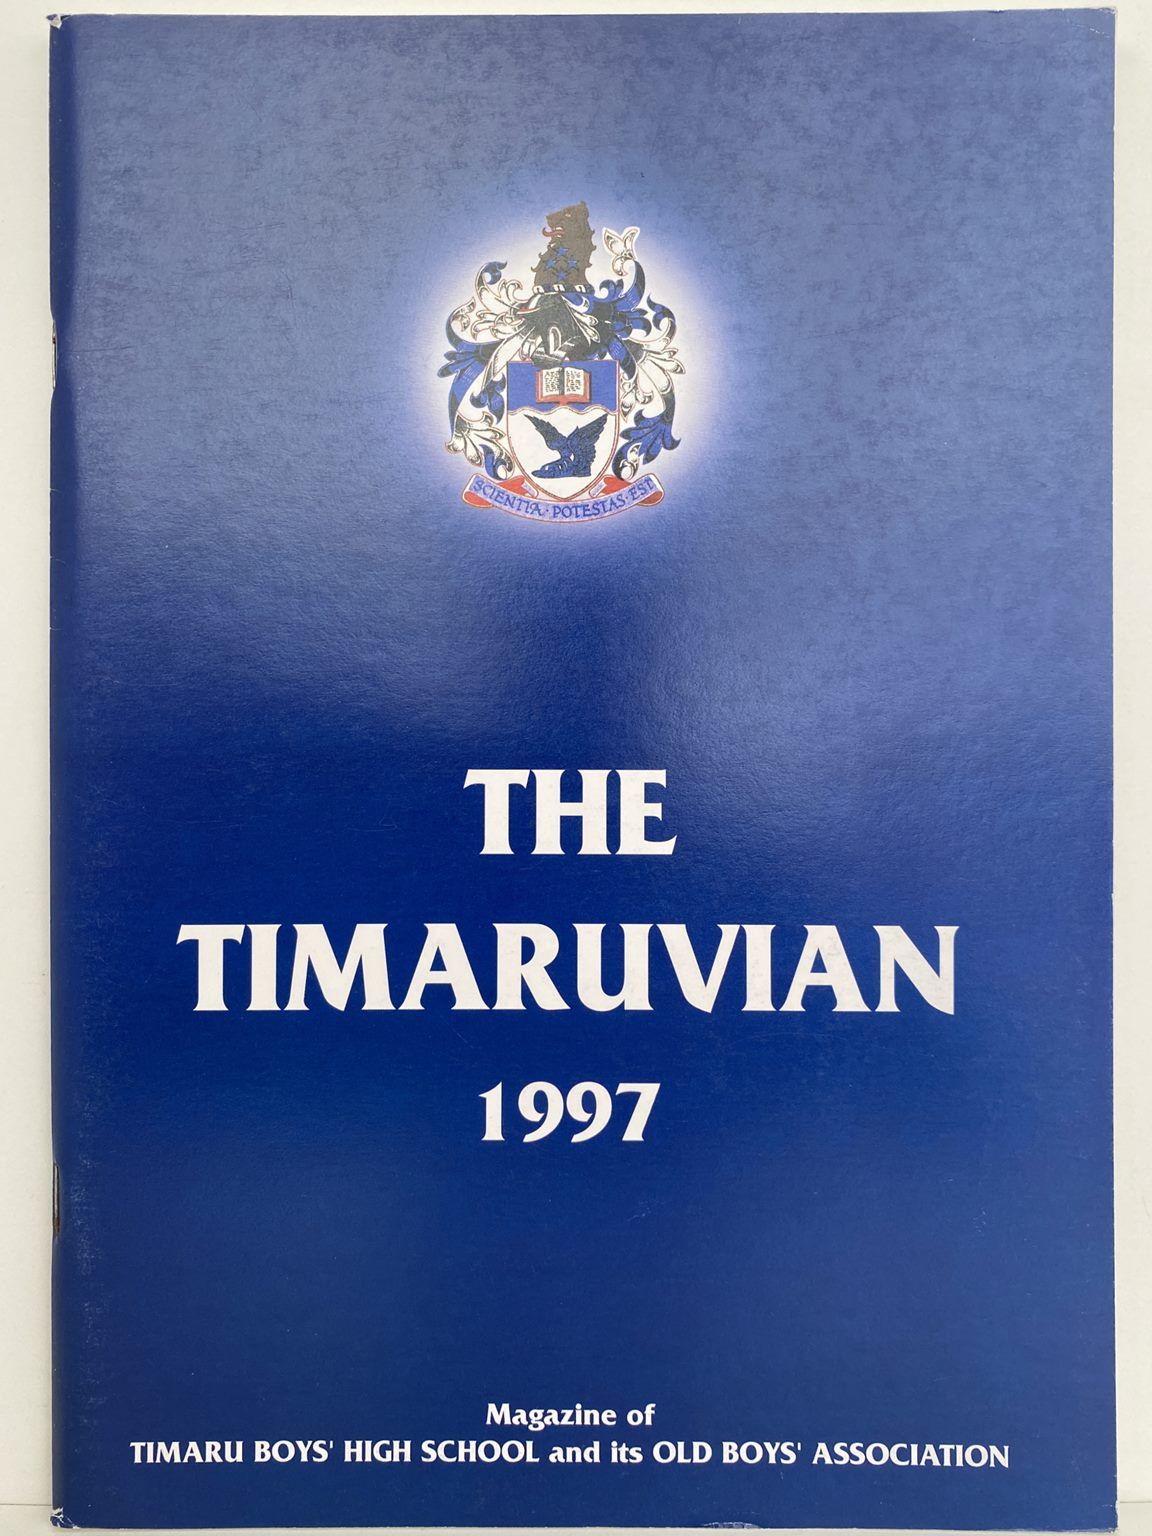 THE TIMARUVIAN: Magazine of the Timaru Boys High School and its Old Boys' Association 1997